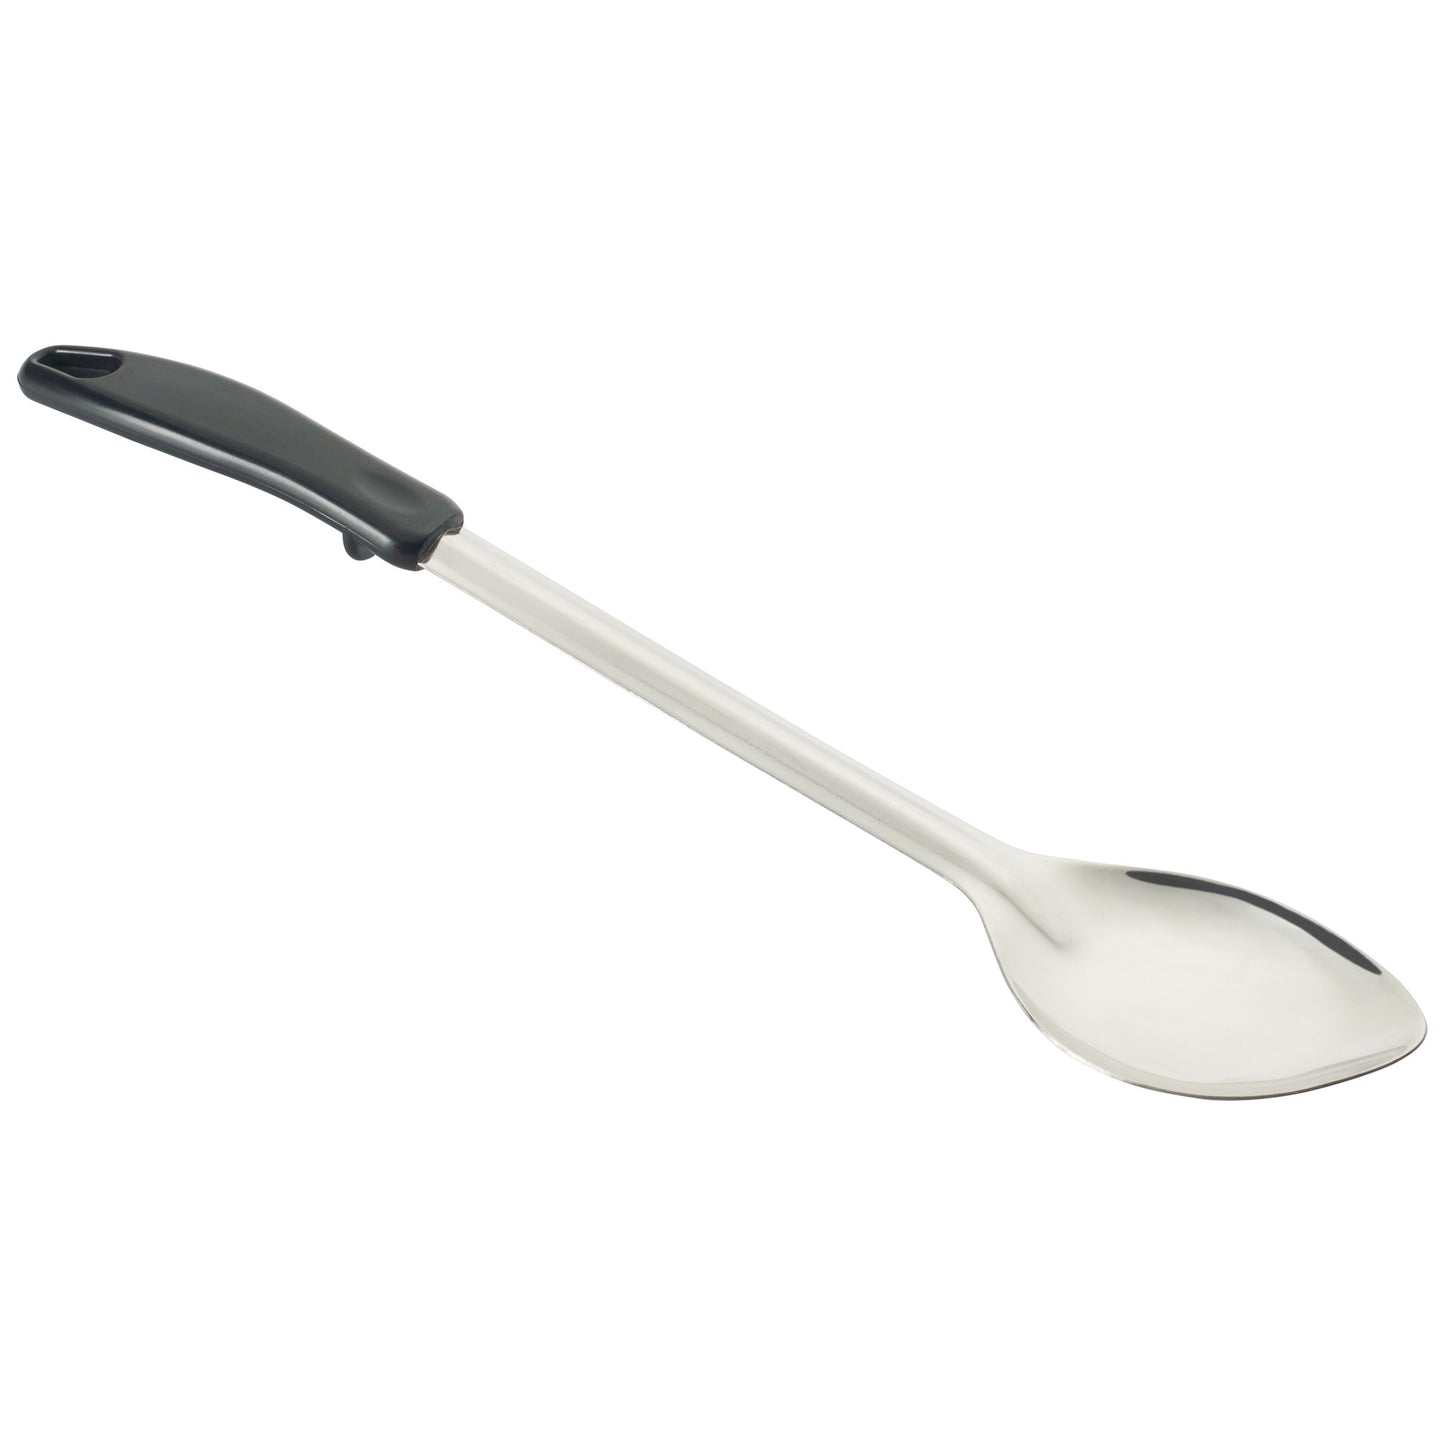 BHOP-15 - Basting Spoon with Stop-Hook Polypropylene Handle - Solid, 15"